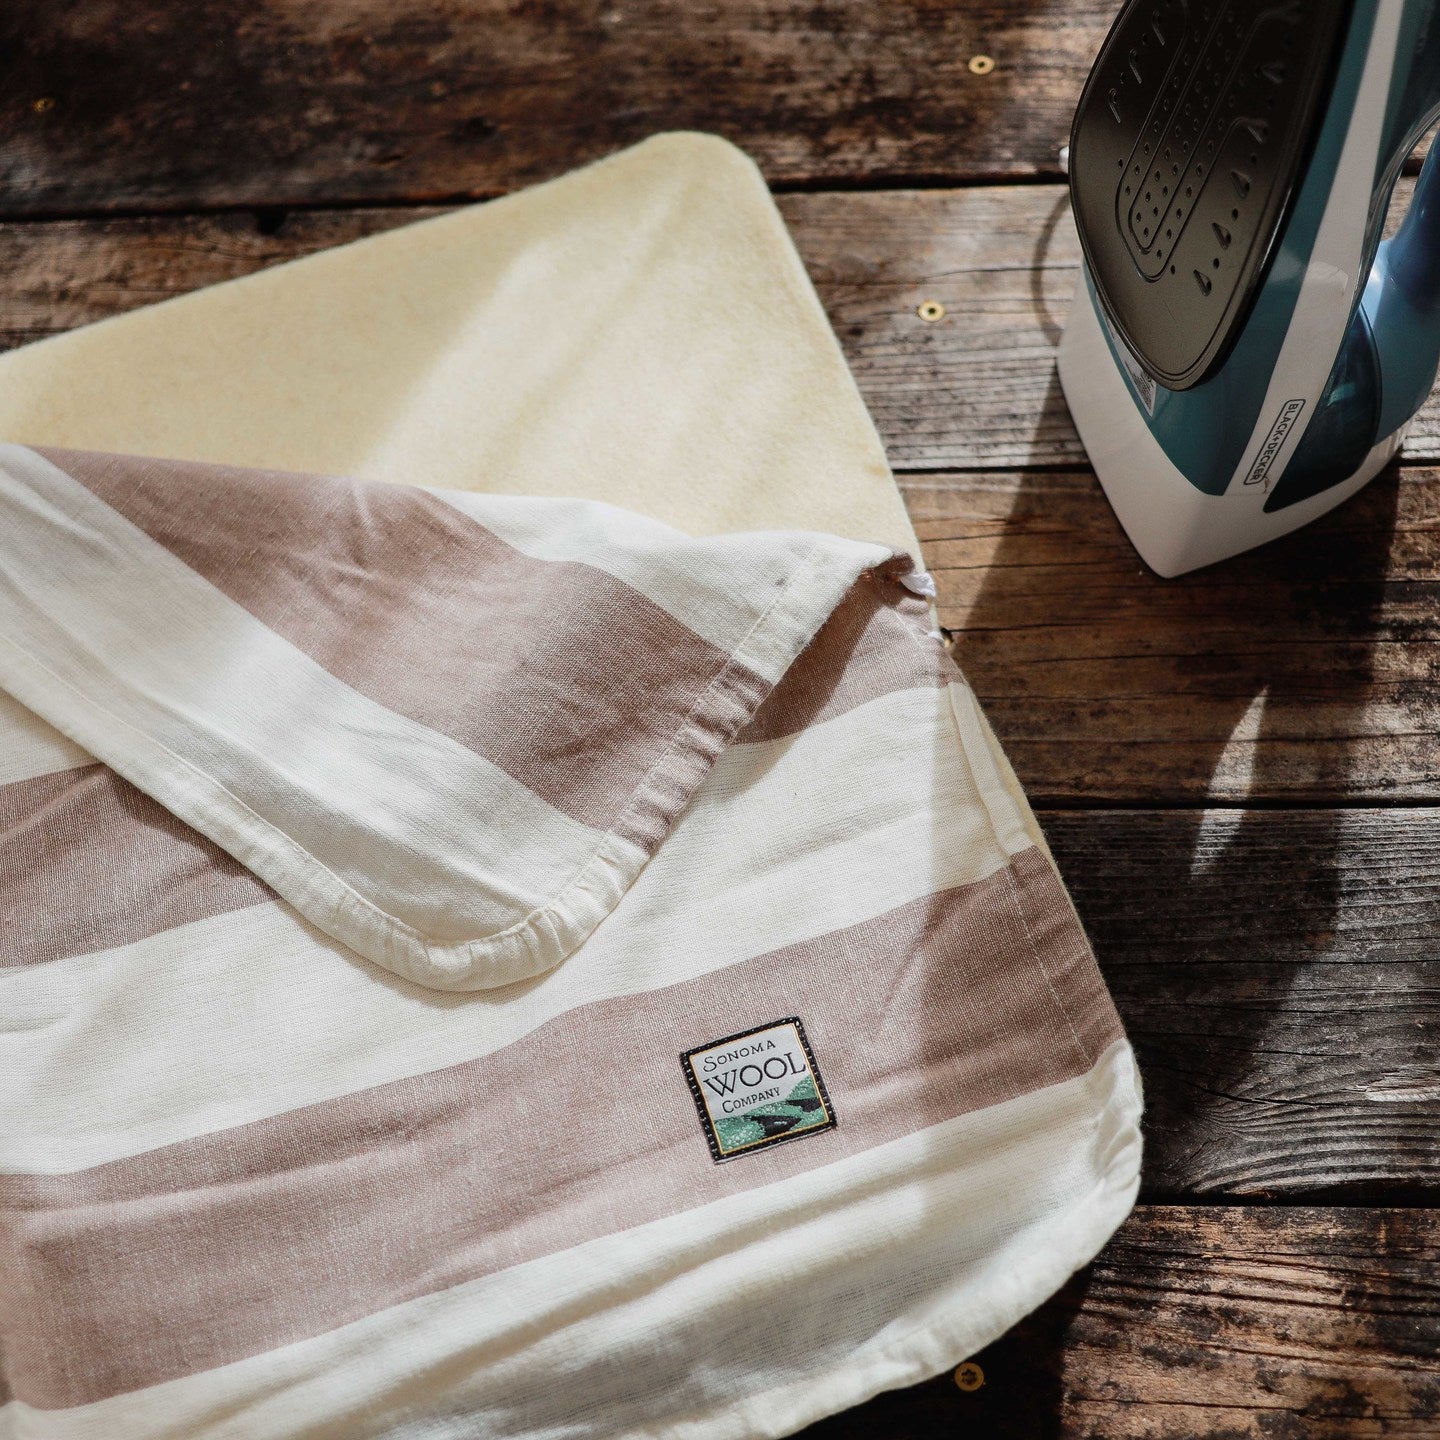 DIY Plastic-Free Ironing Board Cover and Natural Wool Pad » My